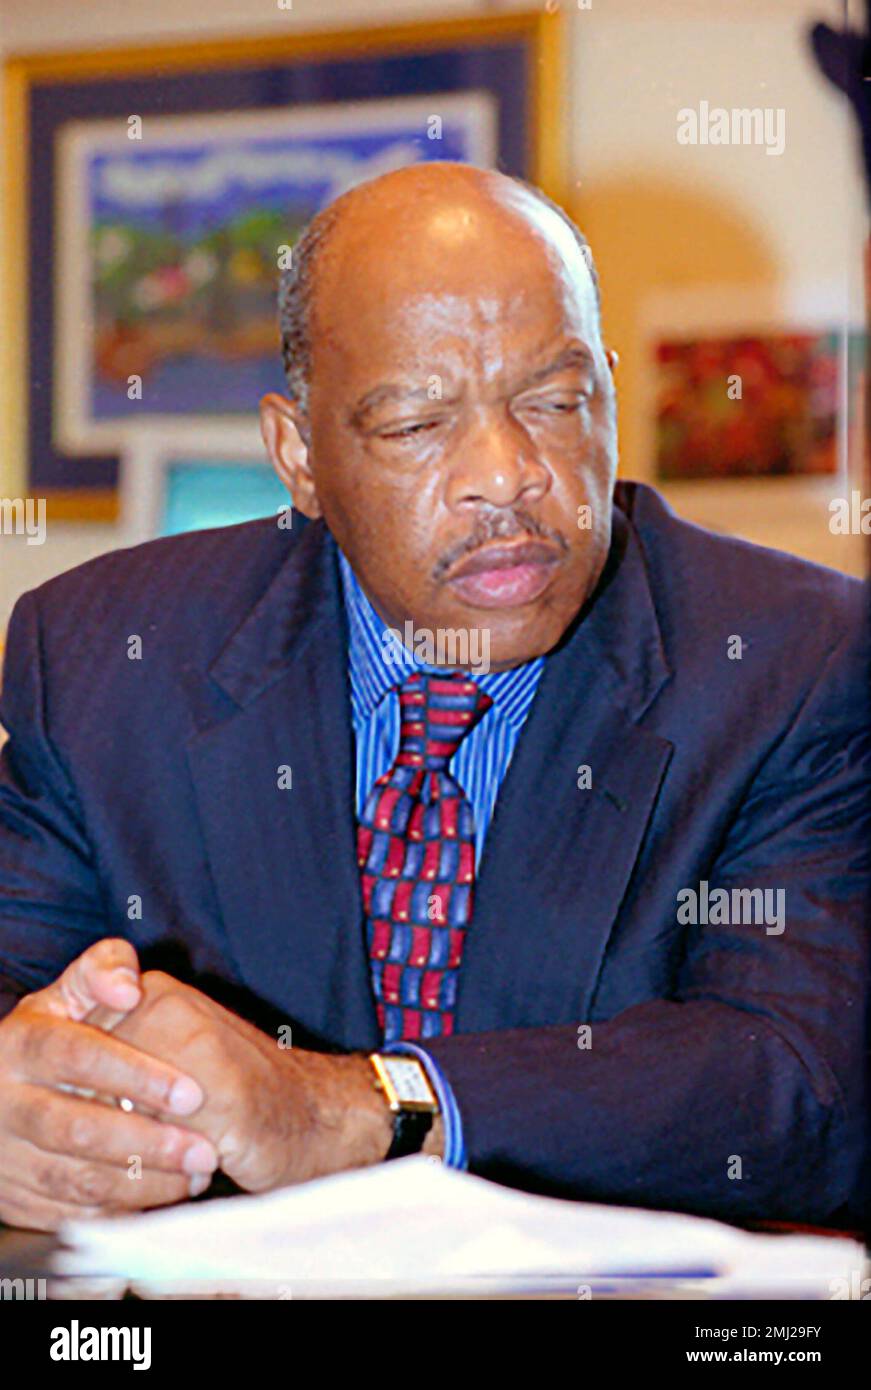 John Lewis. Portrait of the American politician and civil rights activist, John Robert Lewis (1940-2020), 1999. Stock Photo